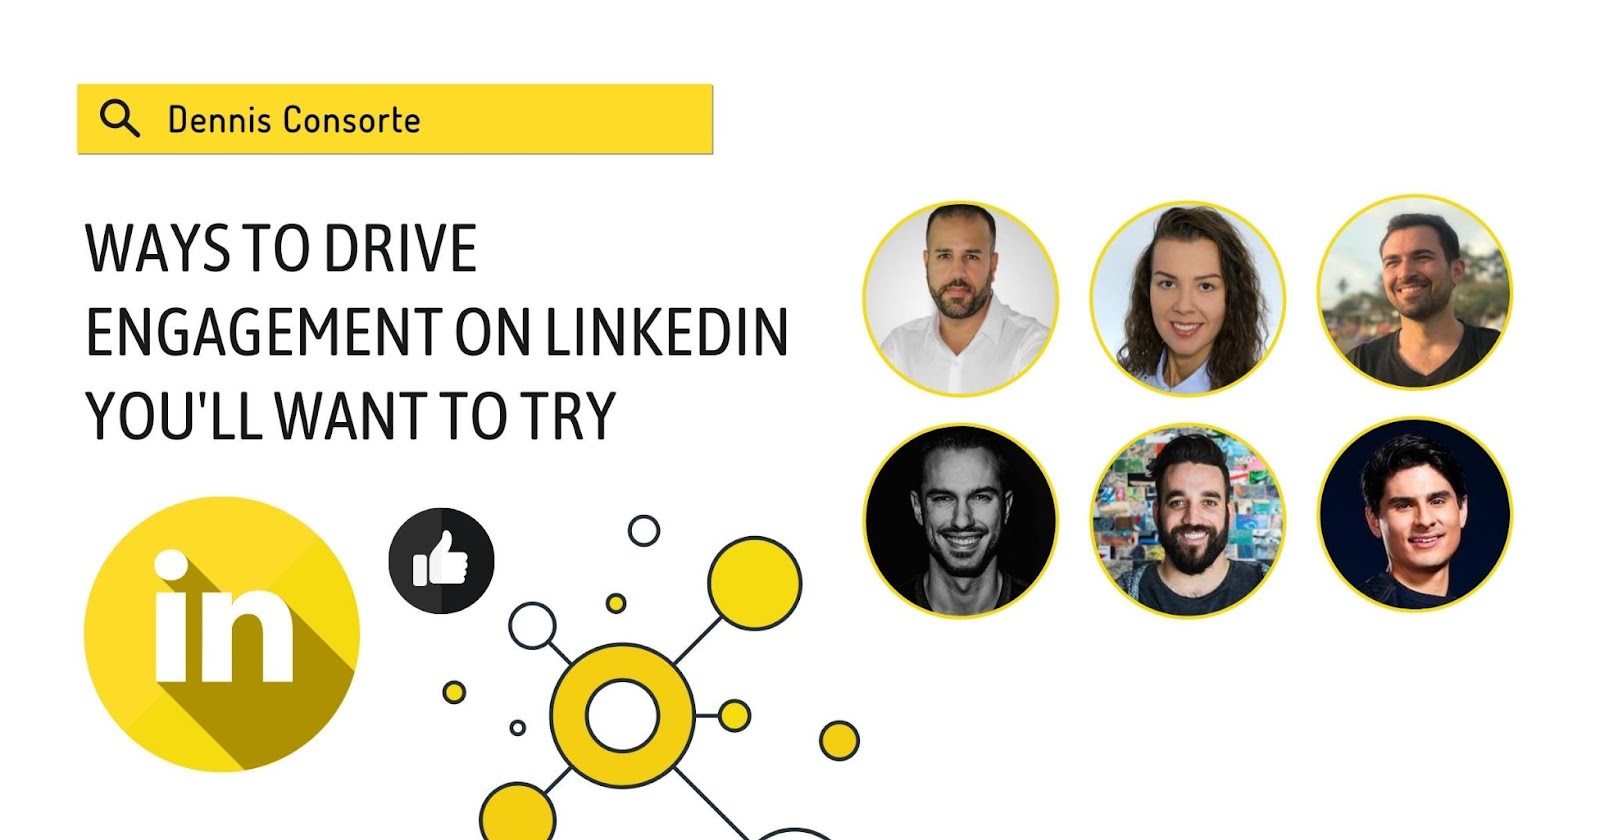 Ways to Drive Engagement on LinkedIn You'll Want to Try